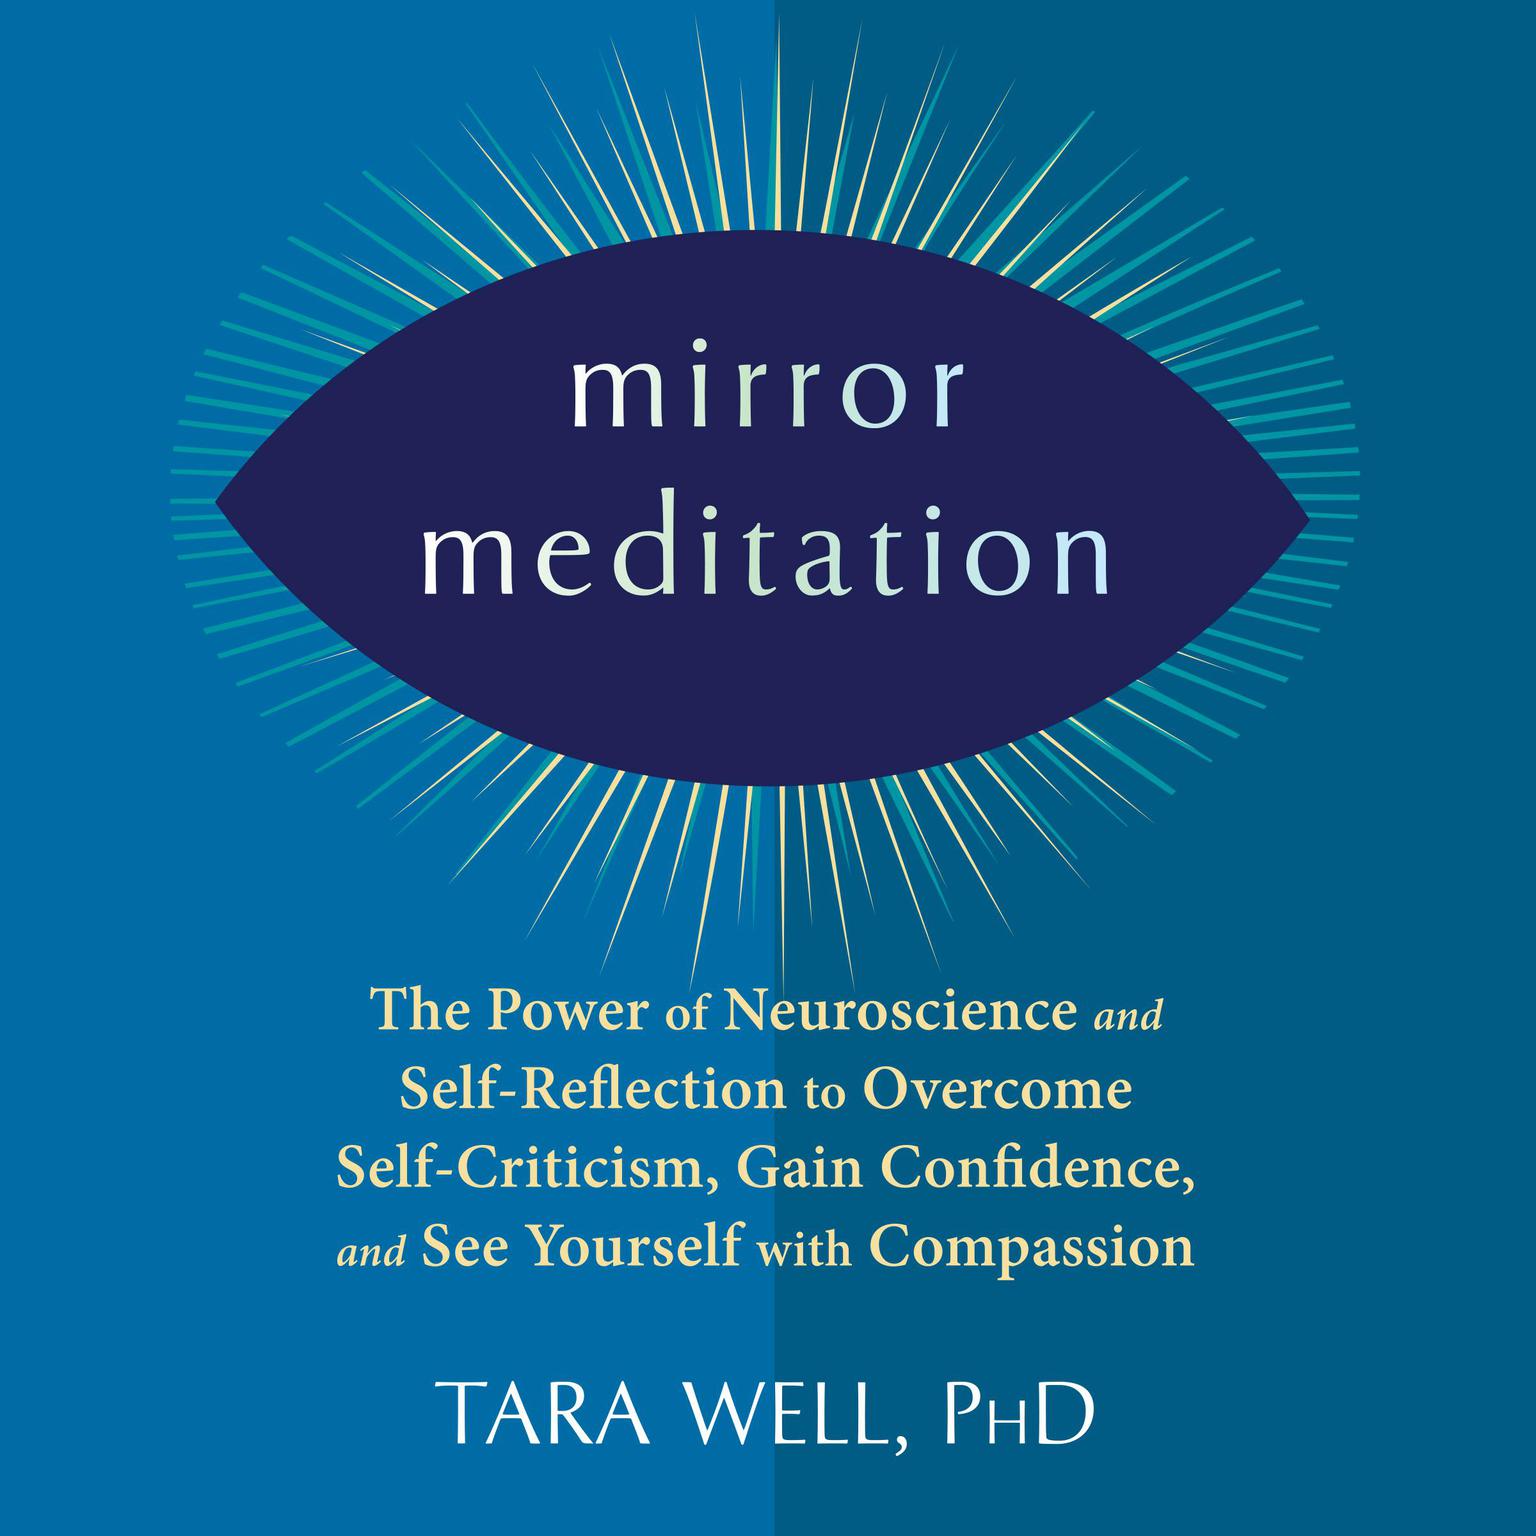 Mirror Meditation: The Power of Neuroscience and Self-Reflection to Overcome Self-Criticism, Gain Confidence, and See Yourself with Compassion Audiobook, by Tara Well